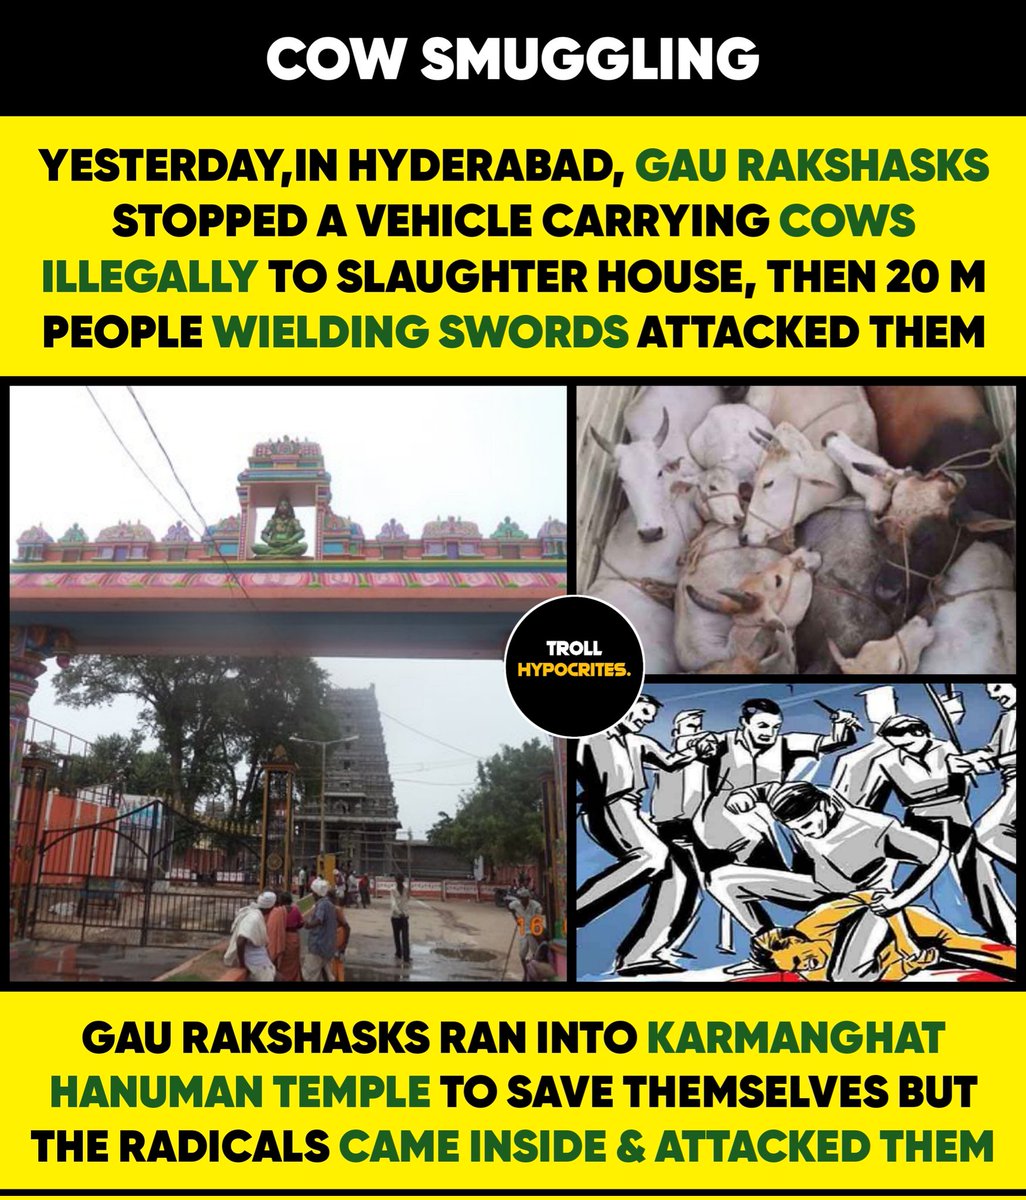 These kind of incidents happened during mughals period.. It is done by mughals then.. Now it is being done by people who feel mughals as their ancestors..

#karmangat #cowsmuggling #gaurakshaks #mob #Hyderabad